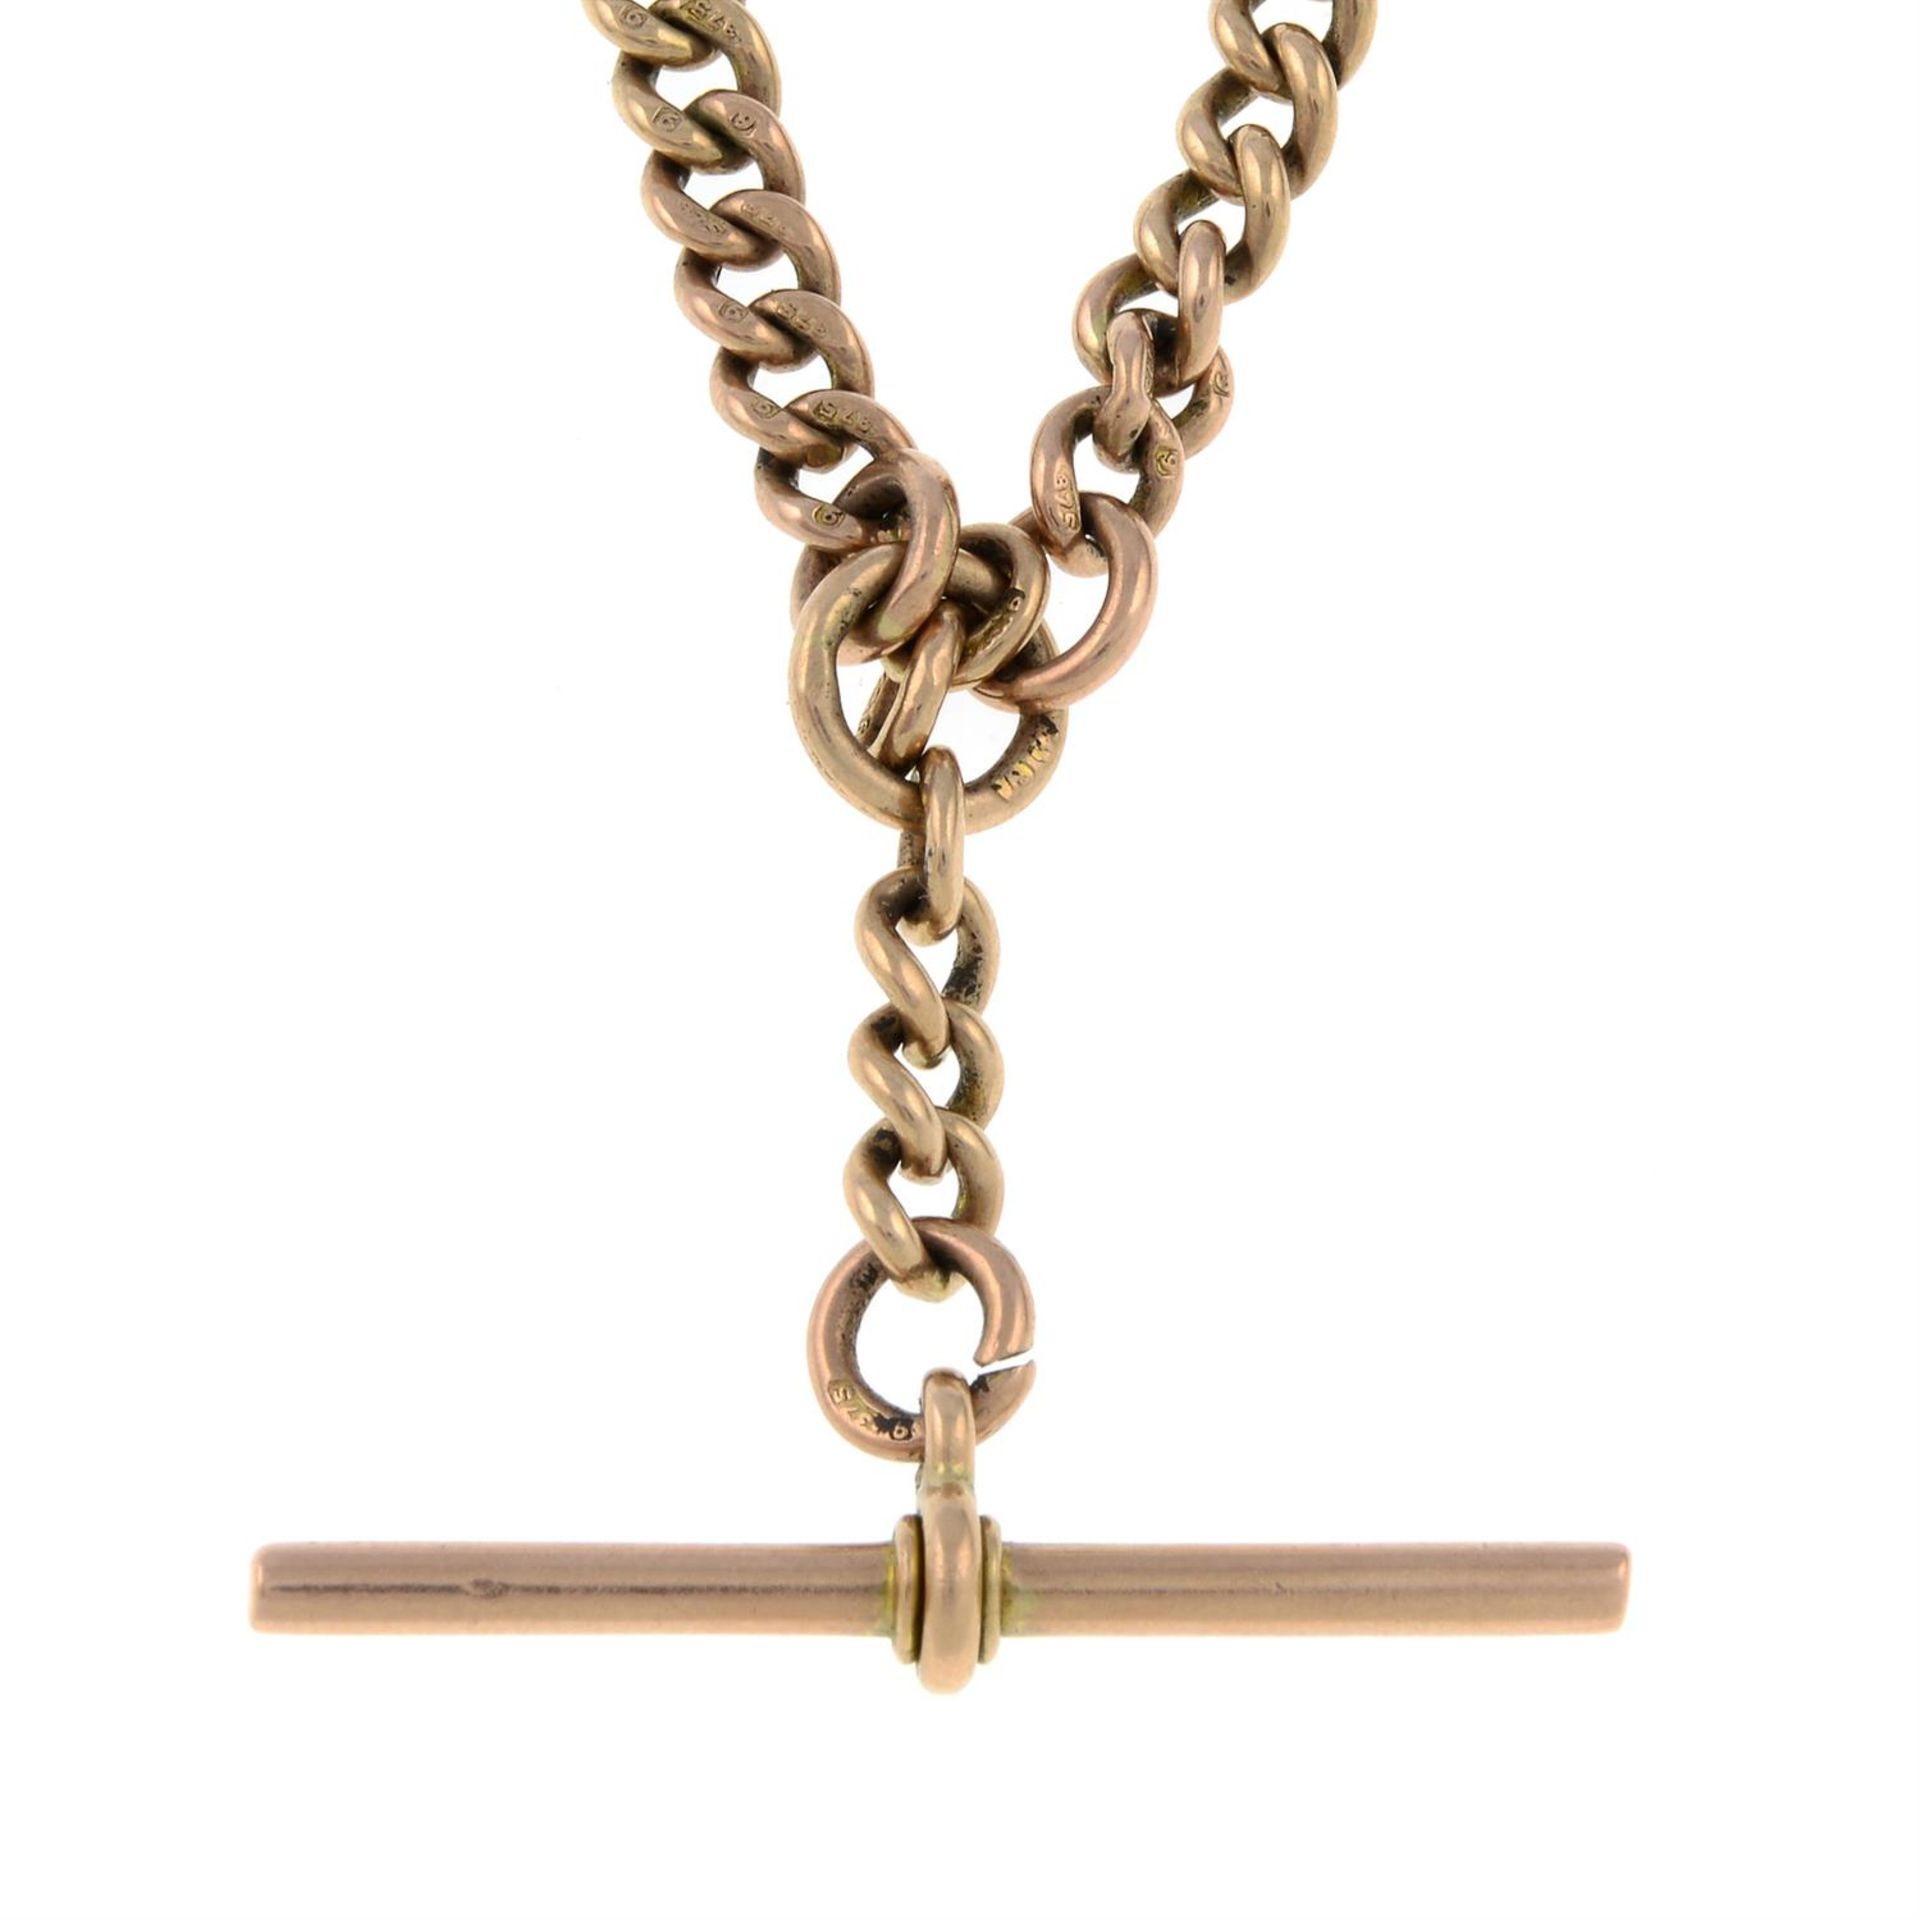 An early 20th century 9ct gold Albert chain.